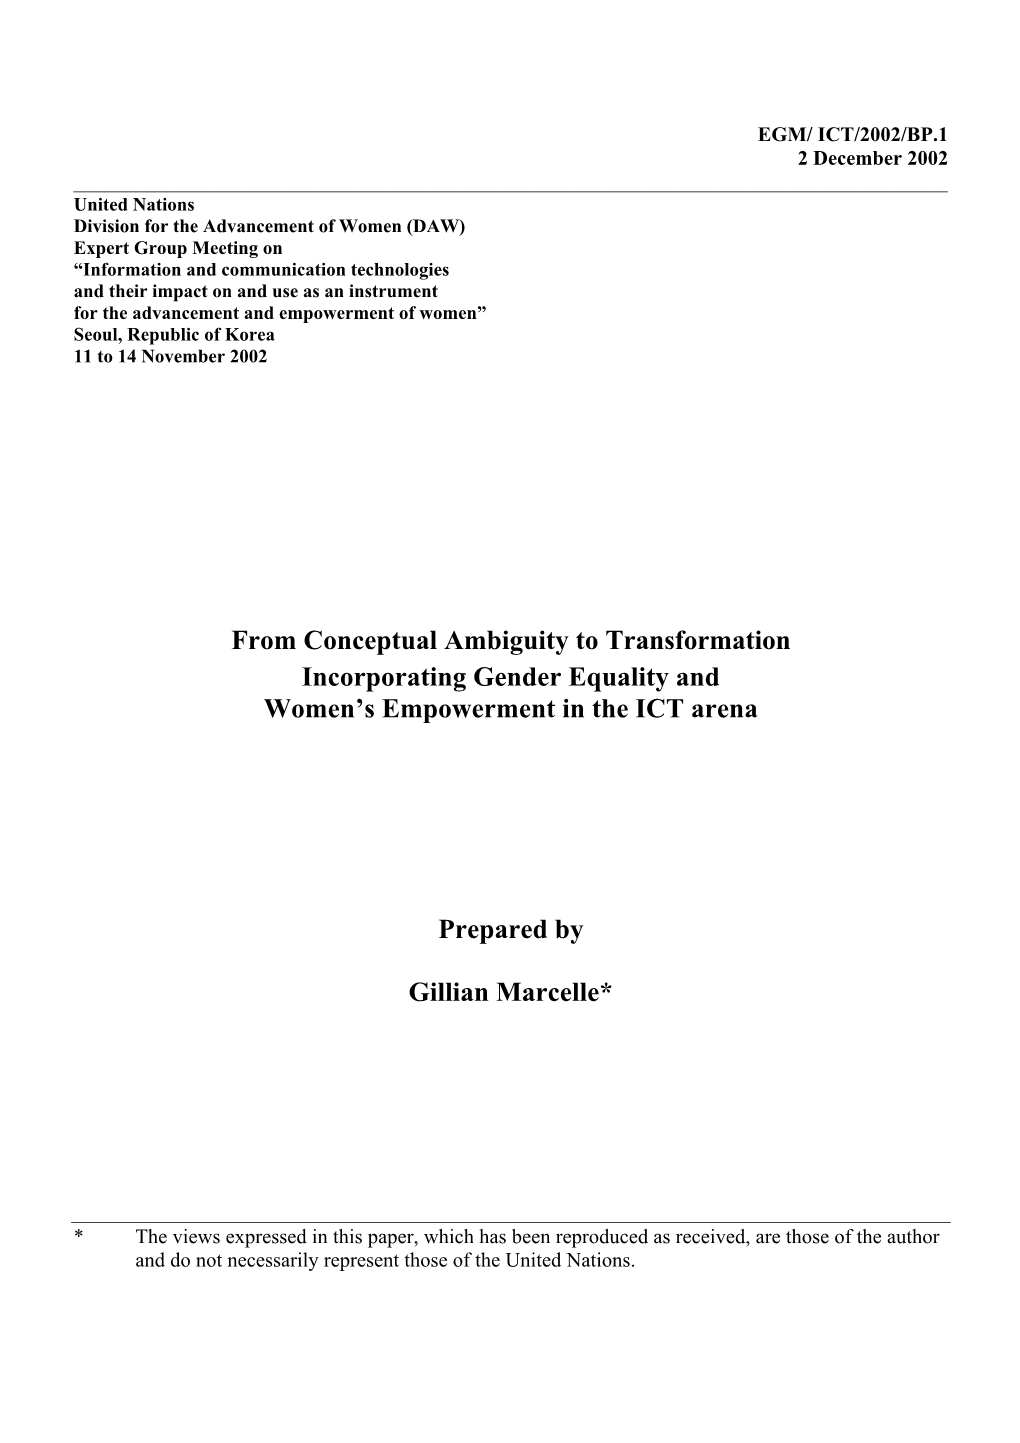 From Conceptual Ambiguity to Transformation Incorporating Gender Equality and Women’S Empowerment in the ICT Arena